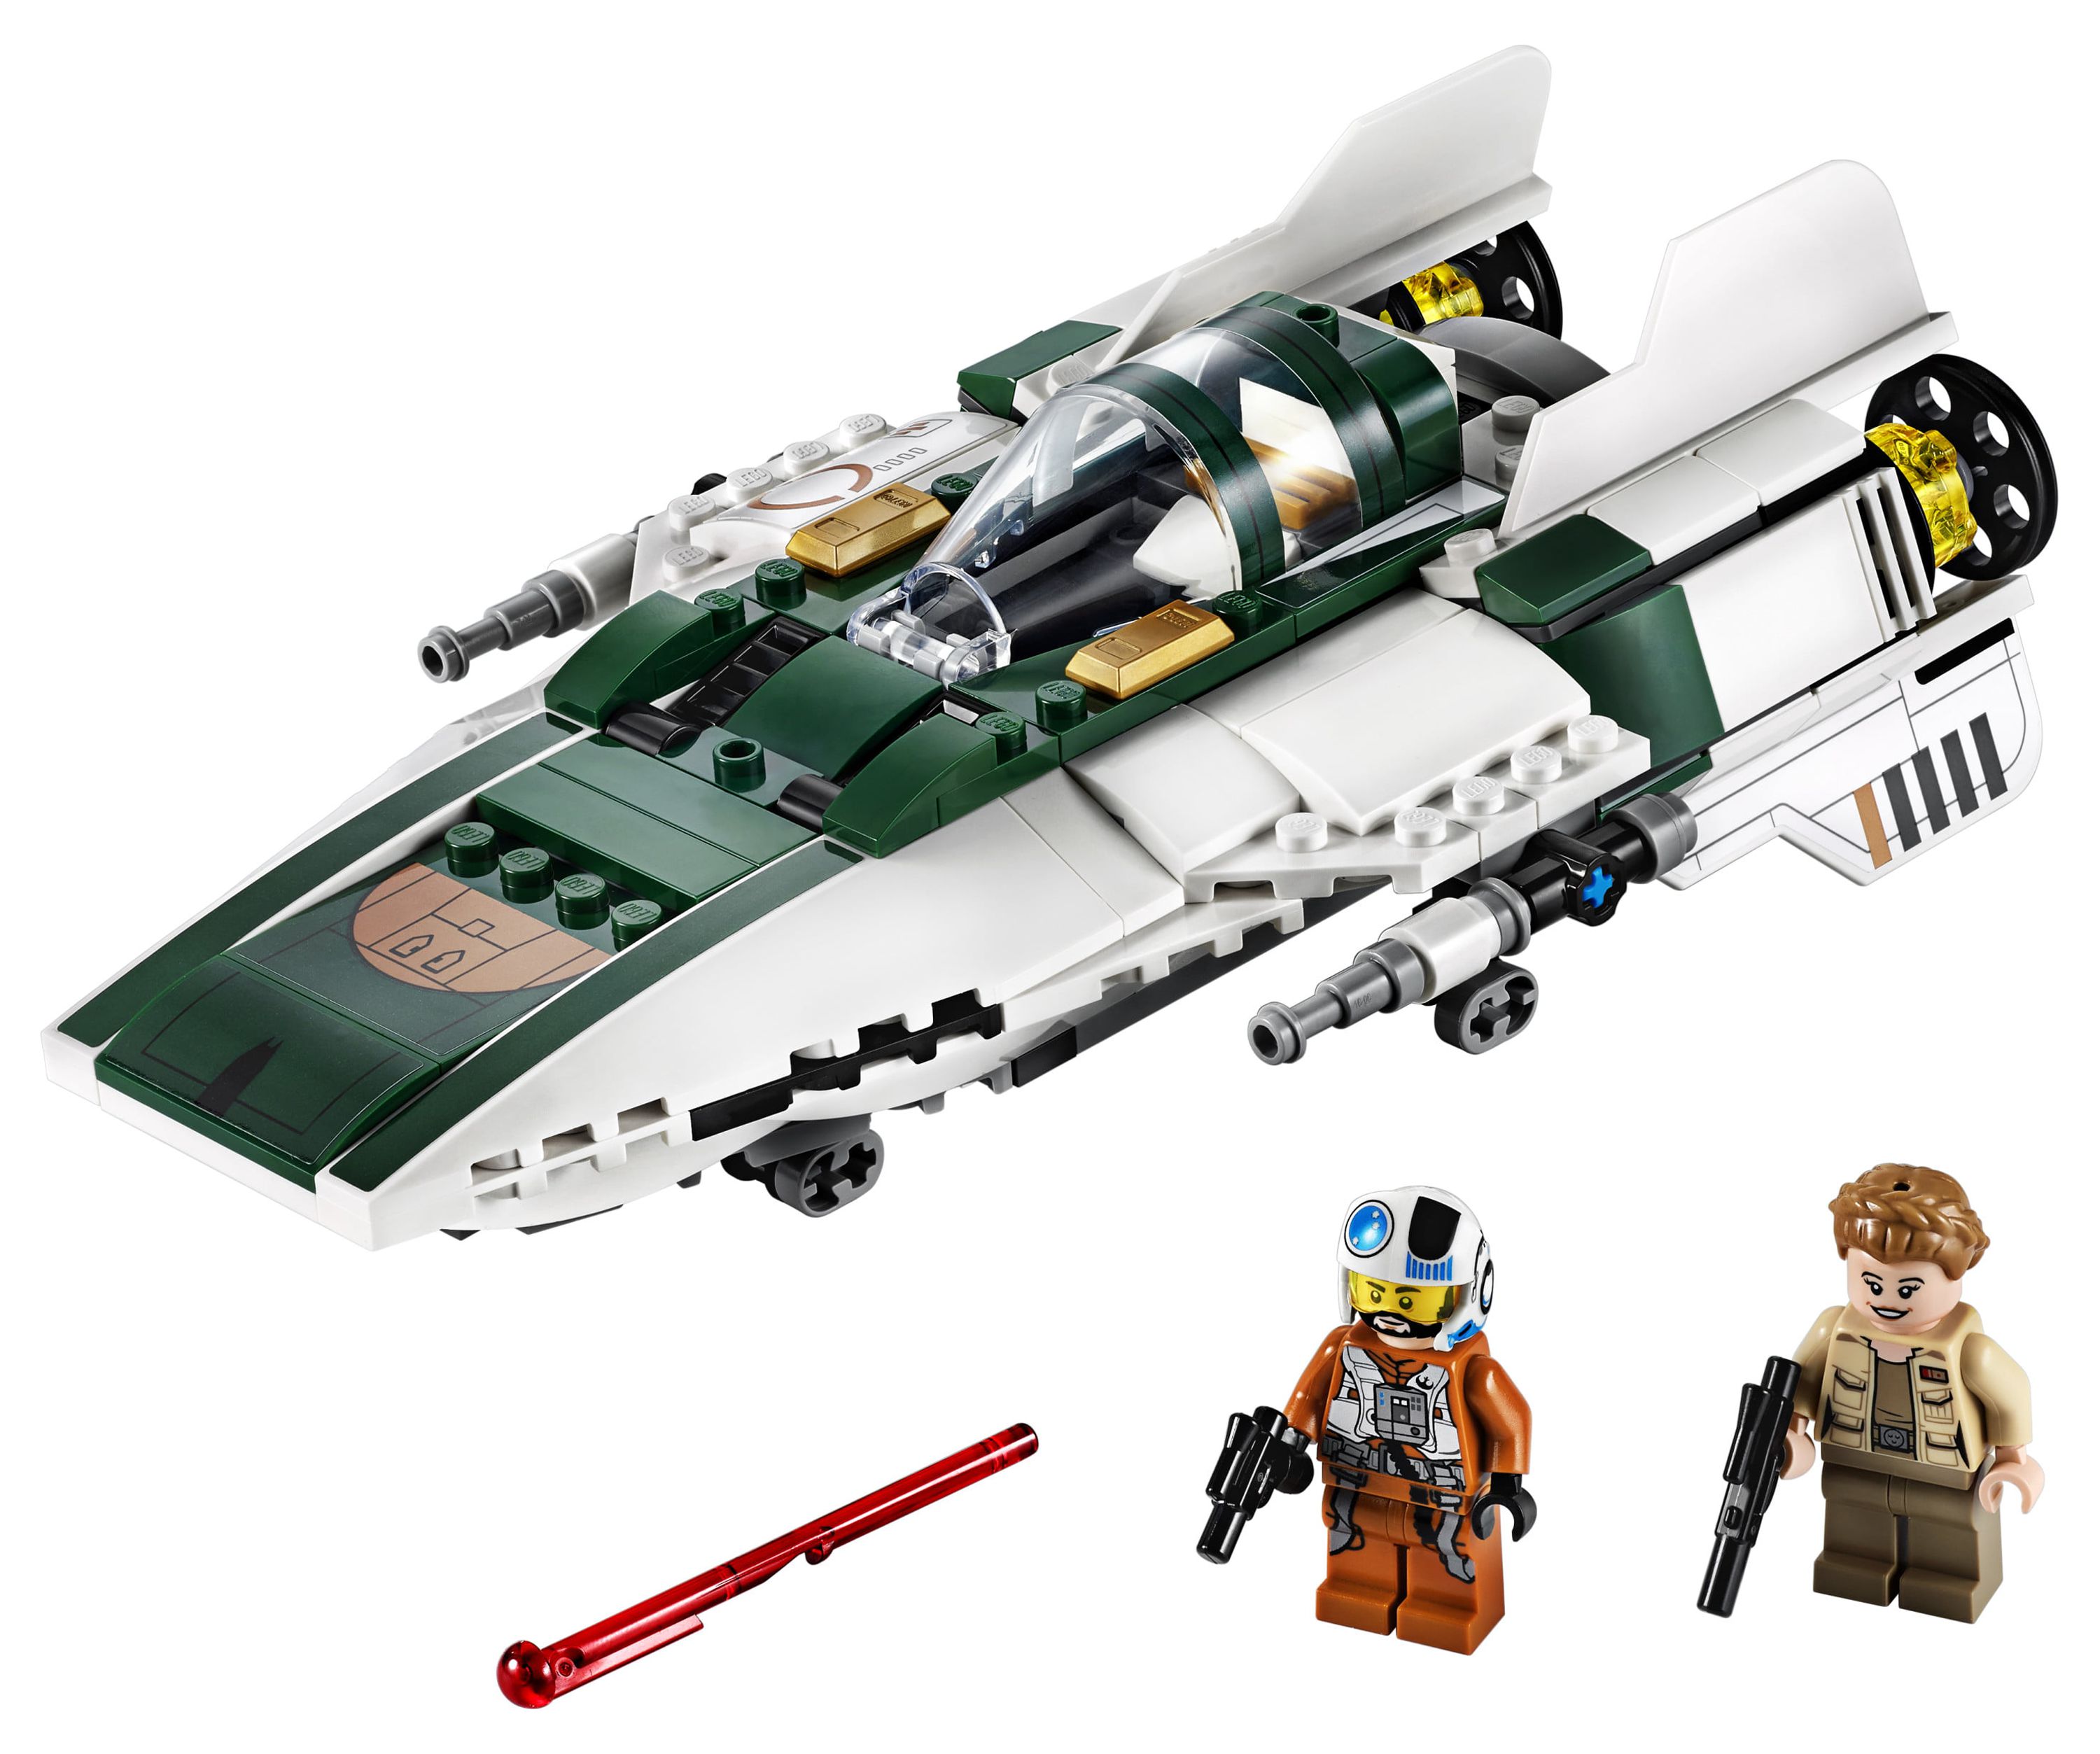 LEGO Star Wars: The Rise of Skywalker Resistance A-Wing Starfighter 75248 Advanced Collectible Starship Model Set (269 Pieces) - image 3 of 6